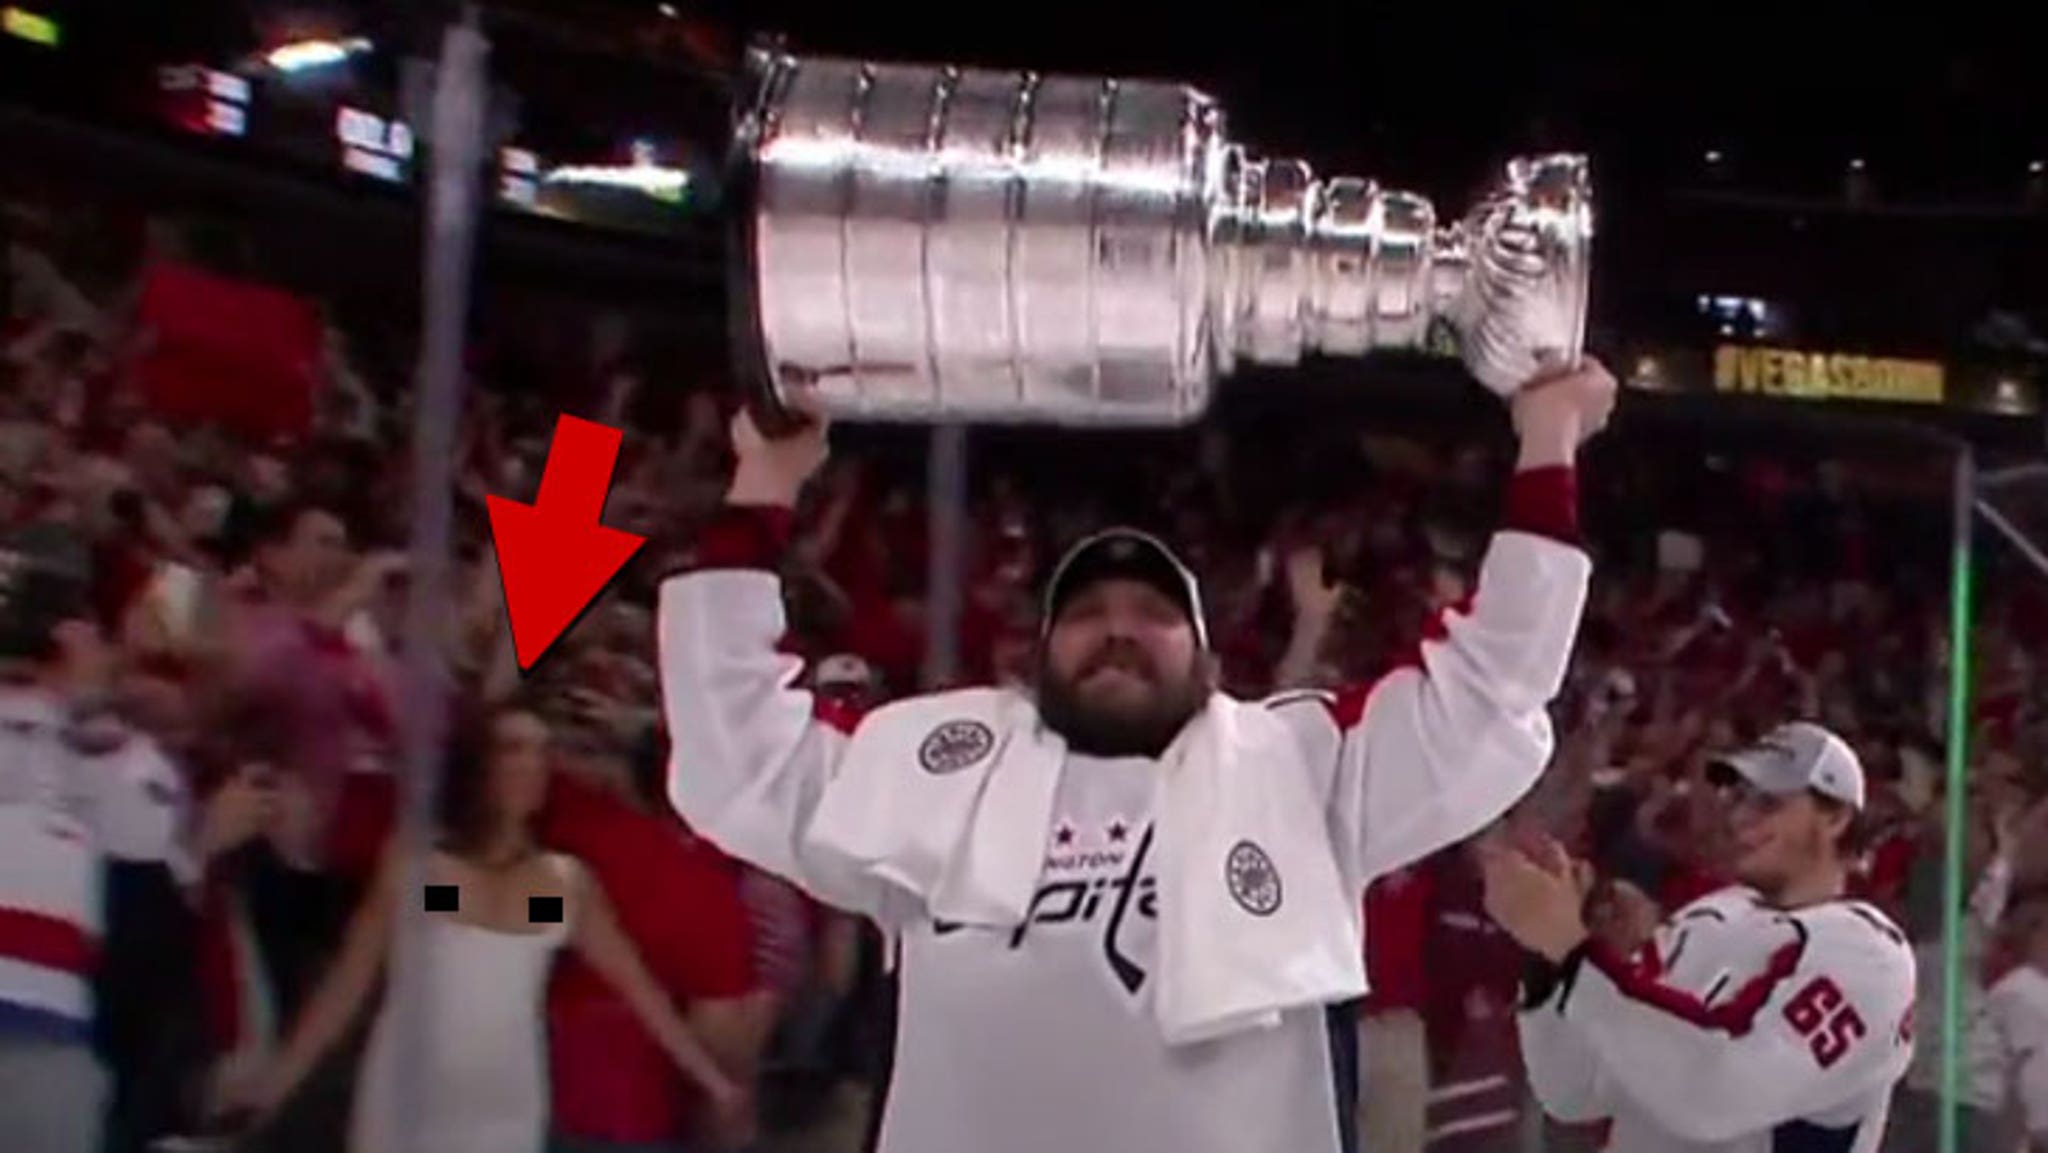 Capitals Get Boob Flashed By Fan During Stanley Cup Ceremony